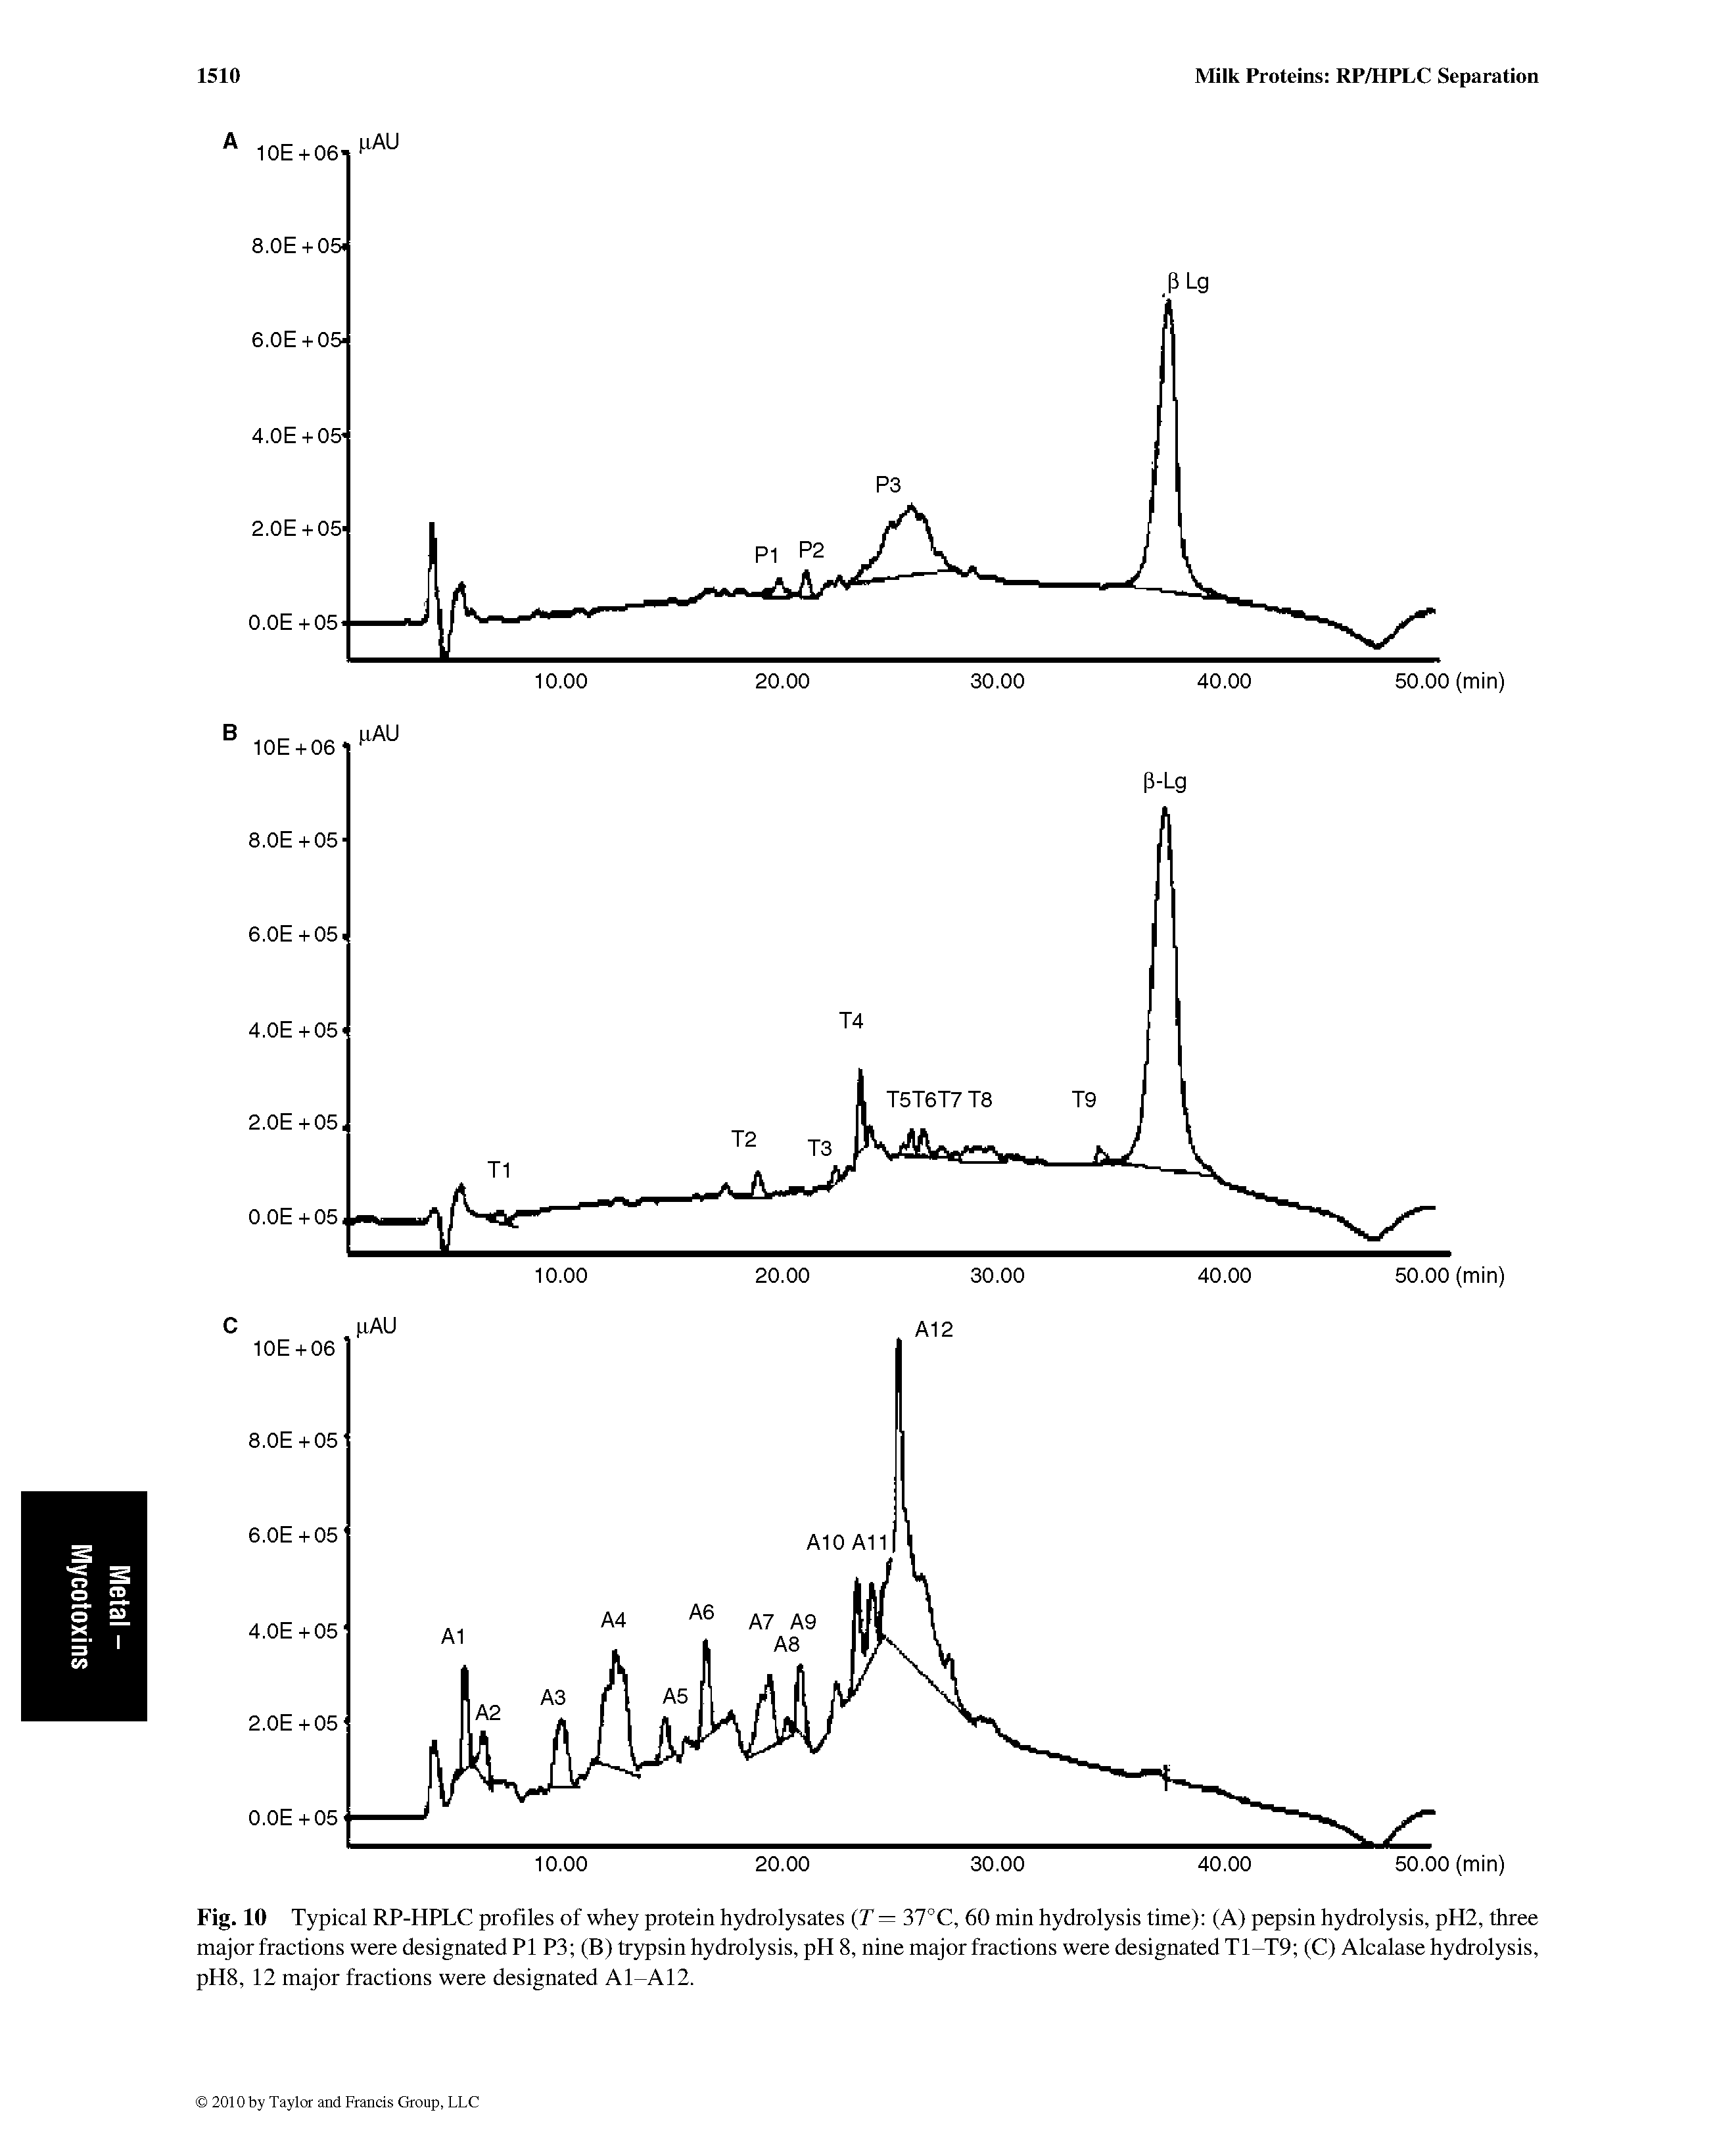 Fig. 10 Typical RP-HPLC profiles of whey protein hydrolysates T = 37°C, 60 min hydrolysis time) (A) pepsin hydrolysis, pH2, three major fractions were designated PI P3 (B) trypsin hydrolysis, pH 8, nine major fractions were designated T1-T9 (C) Alcalase hydrolysis, pH8, 12 major fractions were designated A1-A12.